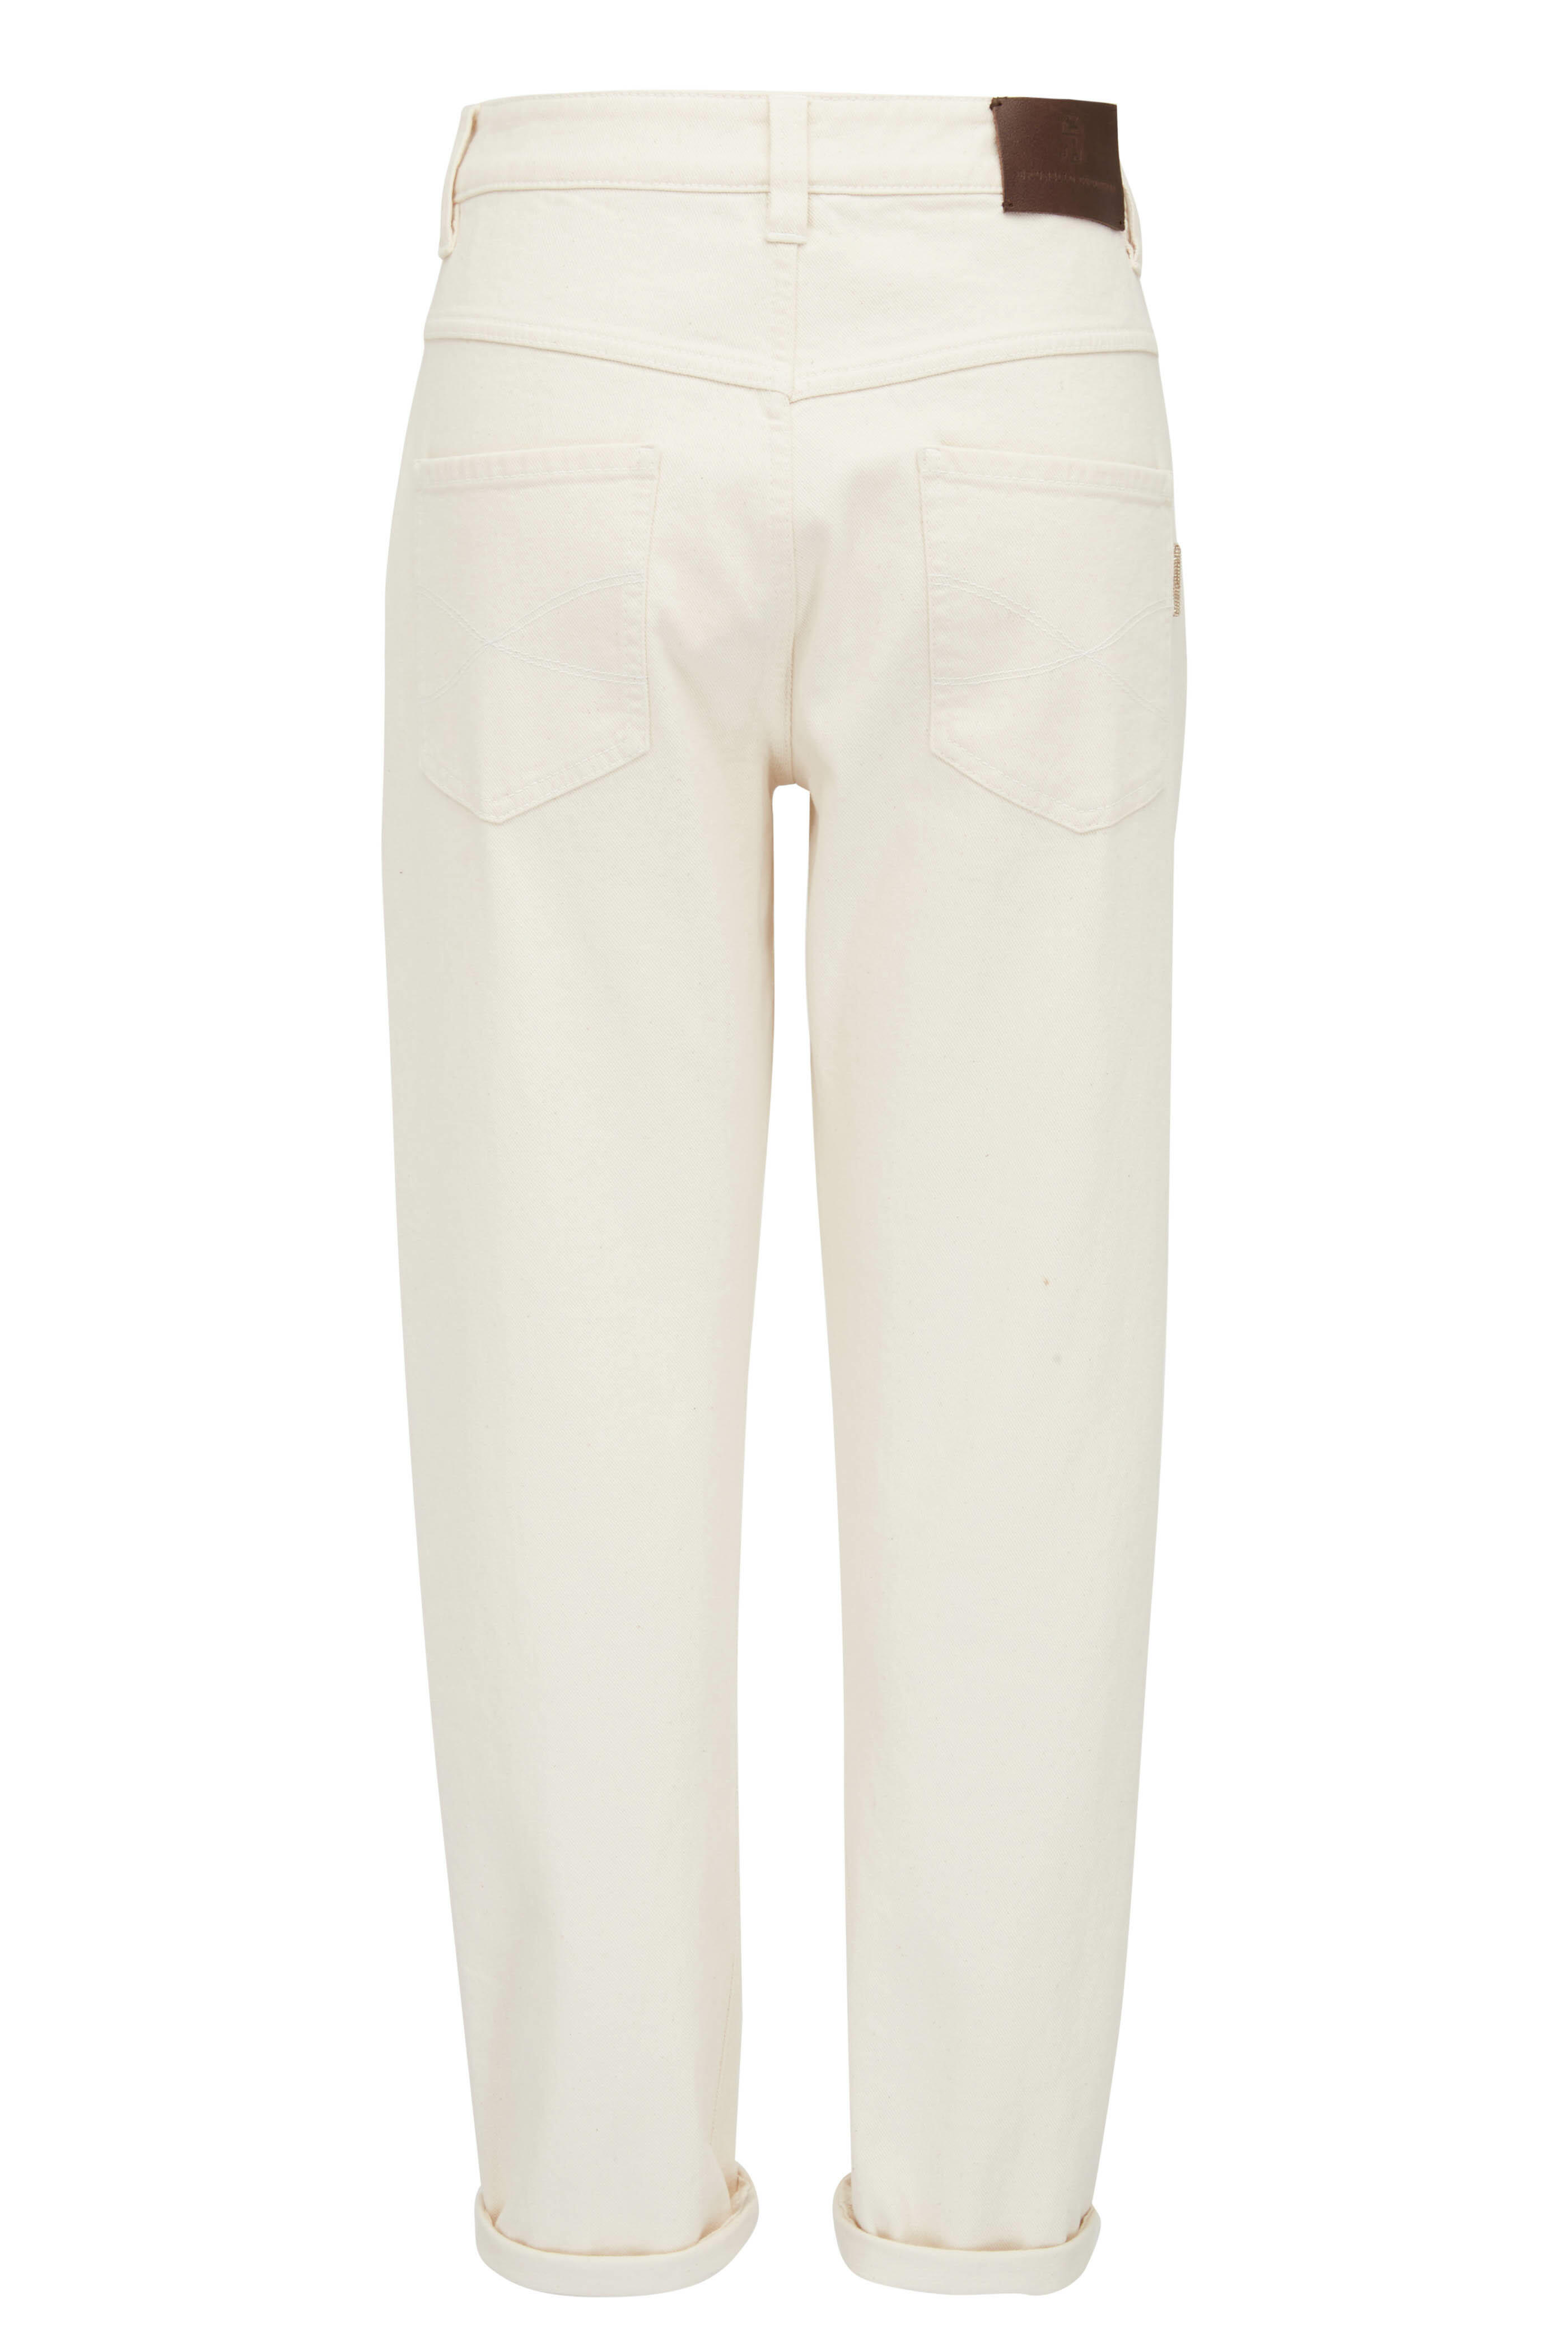 Brunello Cucinelli - Ivory Exposed Button Dyed Pant